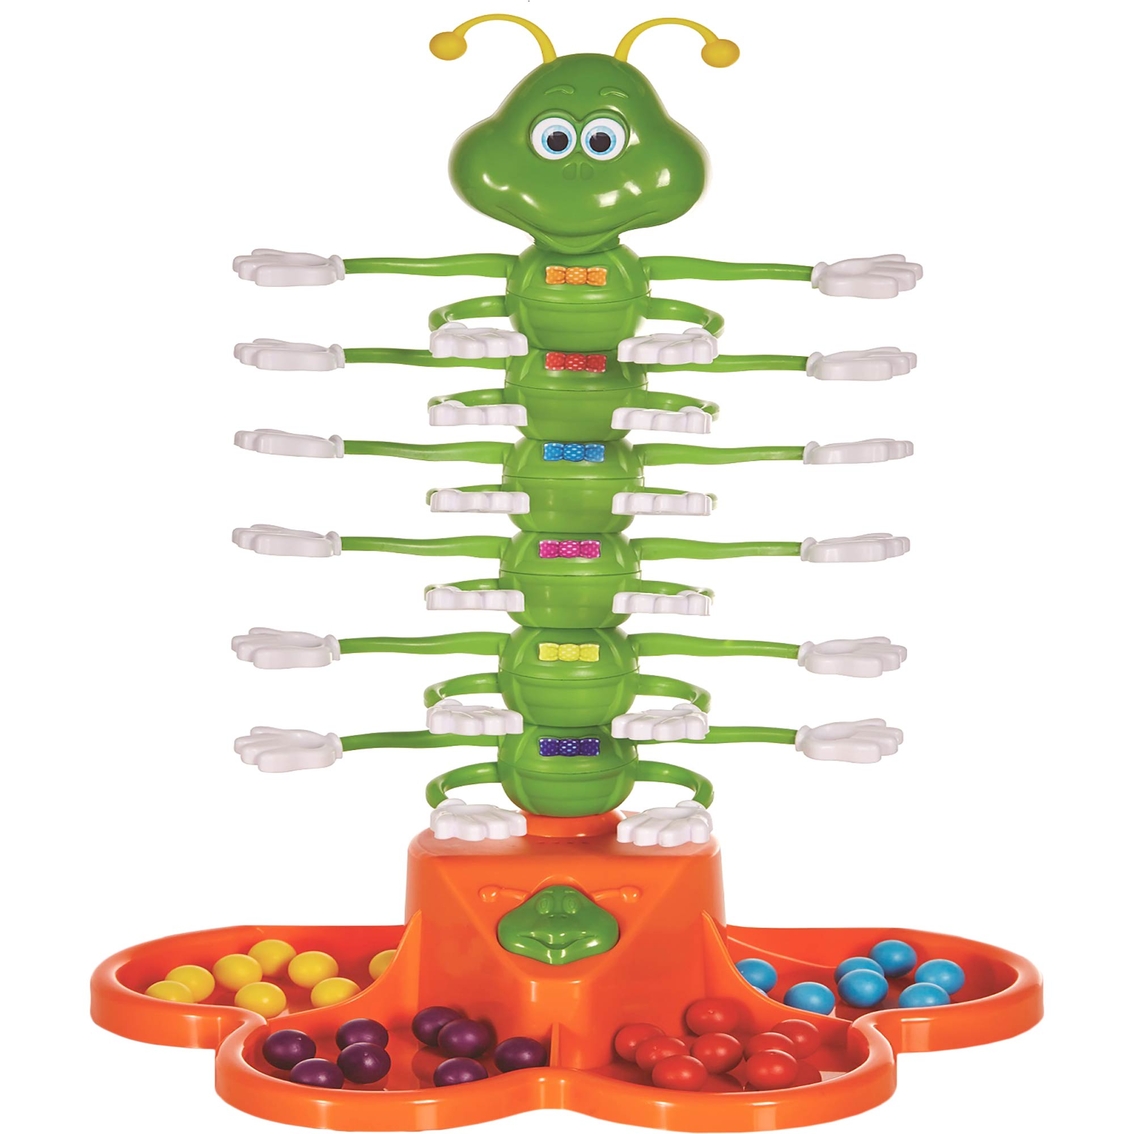 Goliath Games Giggle Wiggle Game - Image 2 of 2